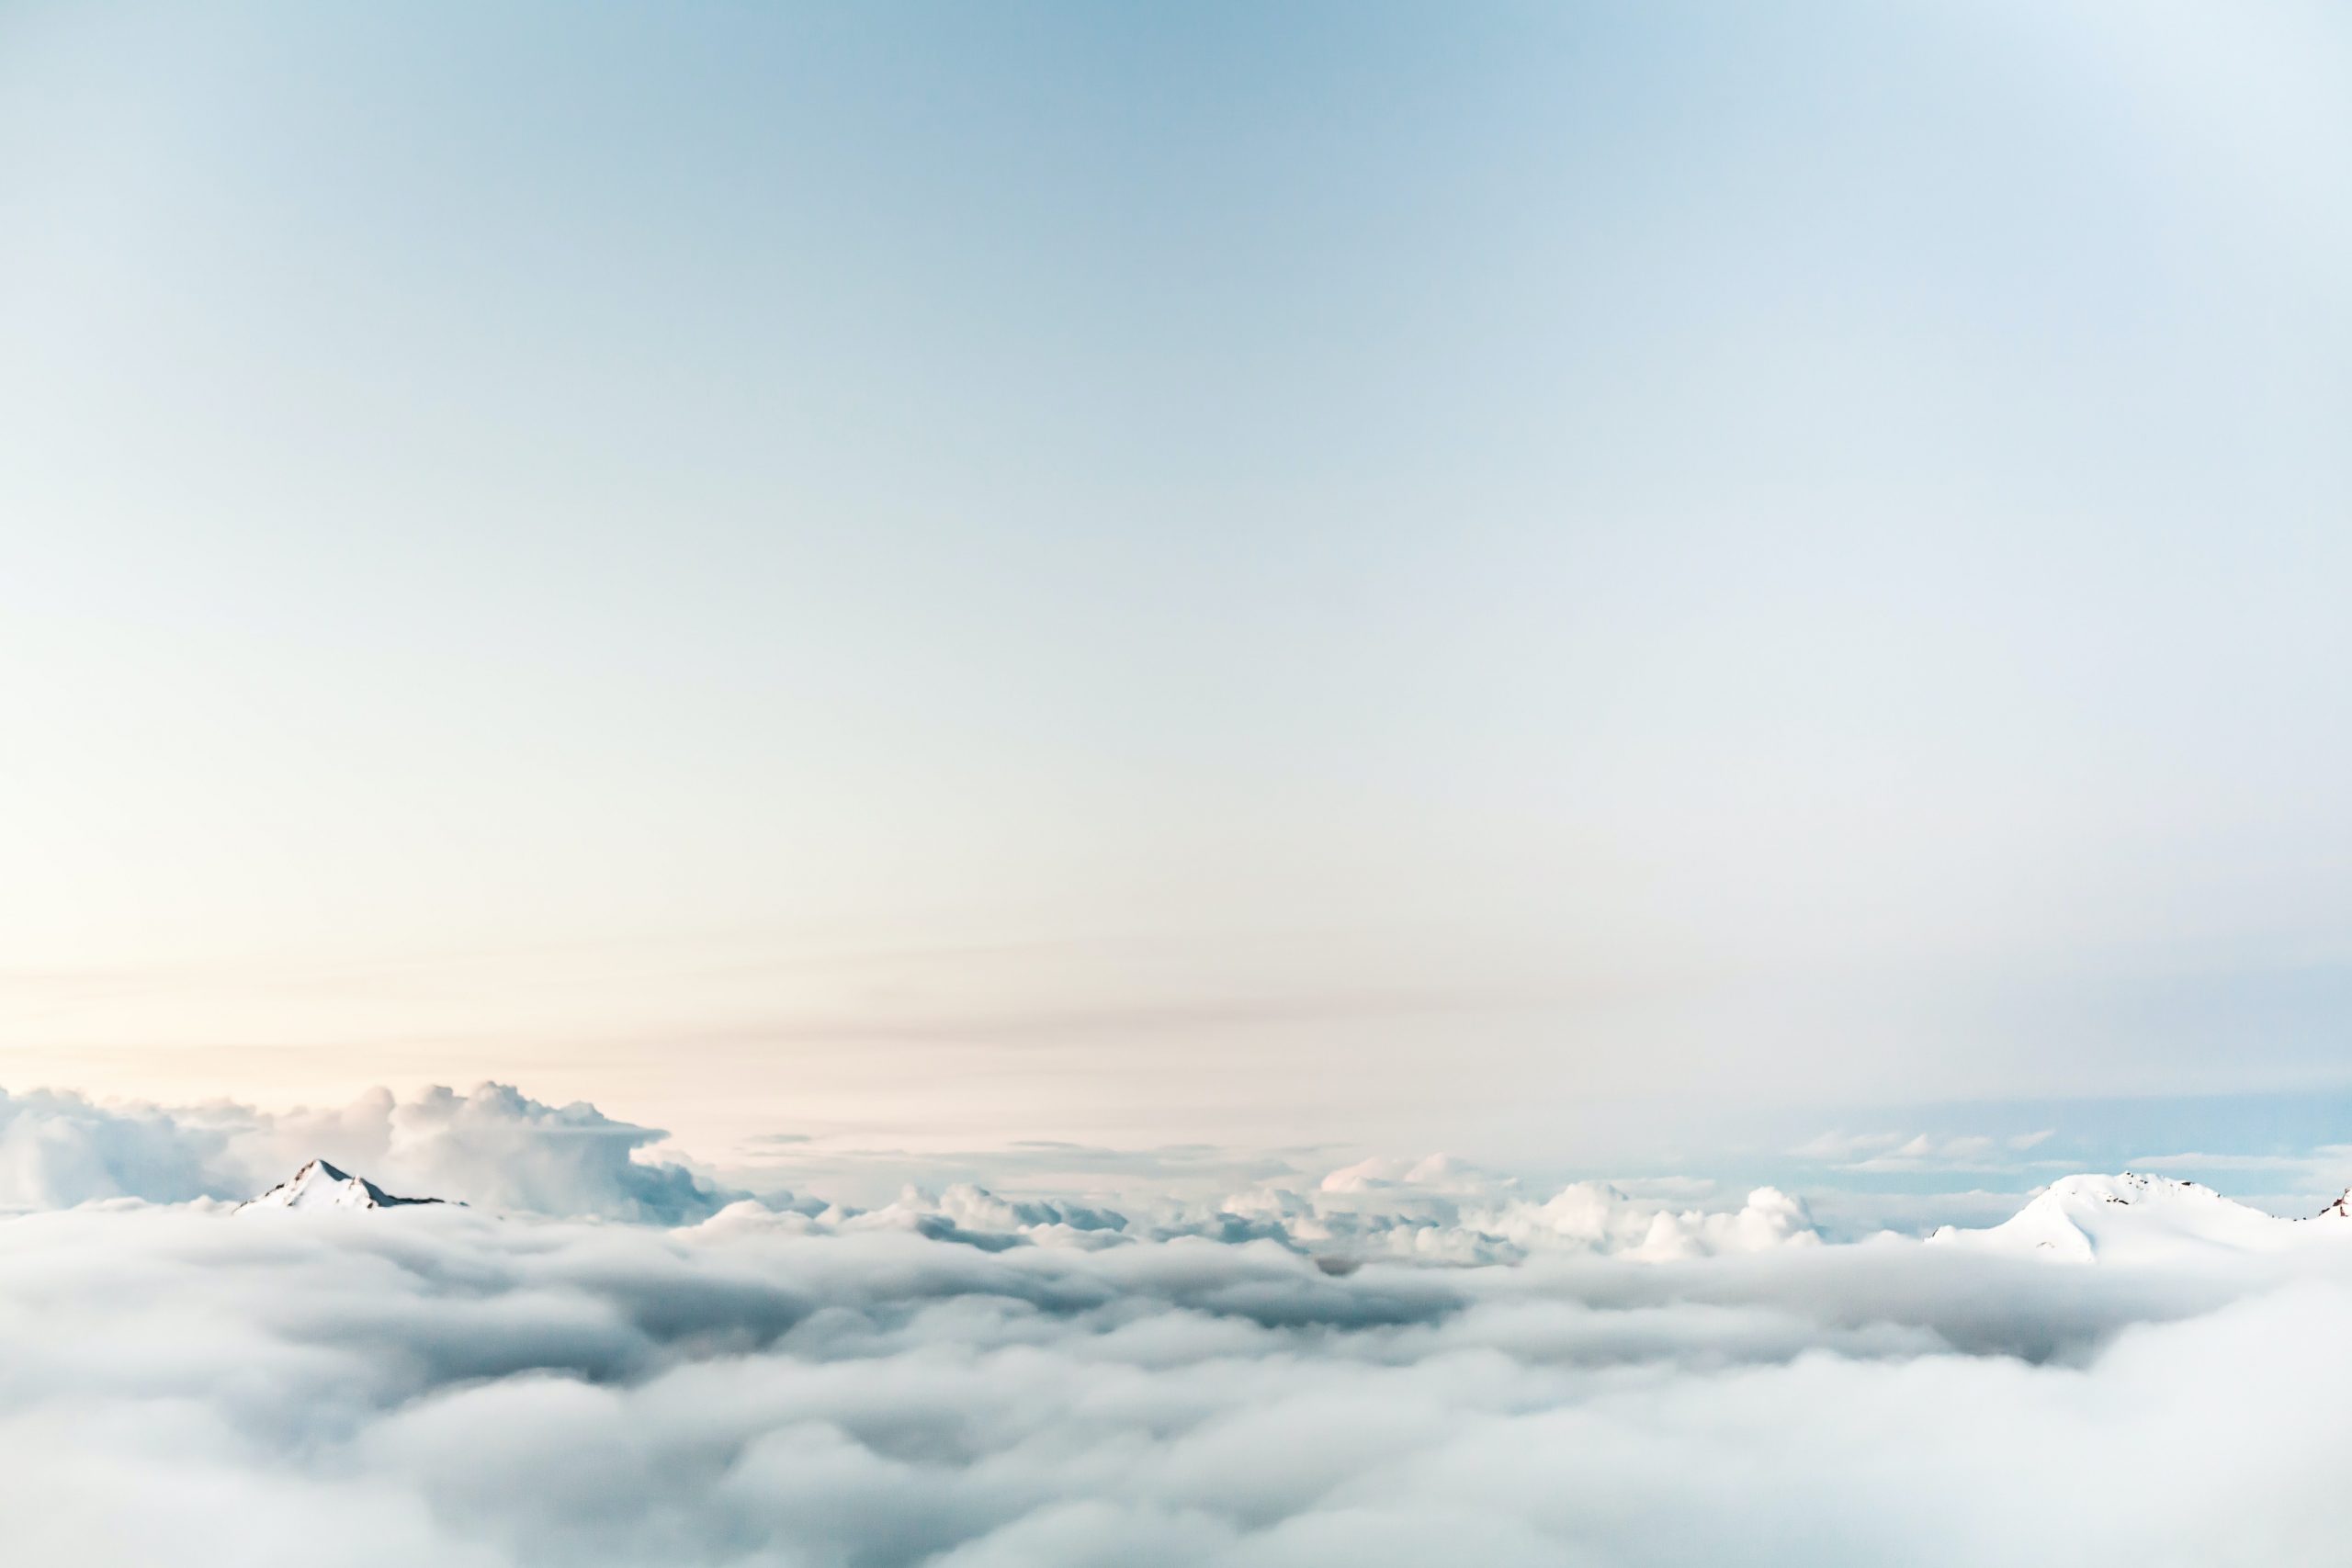 Are you exploring the opportunities in the Cloud?